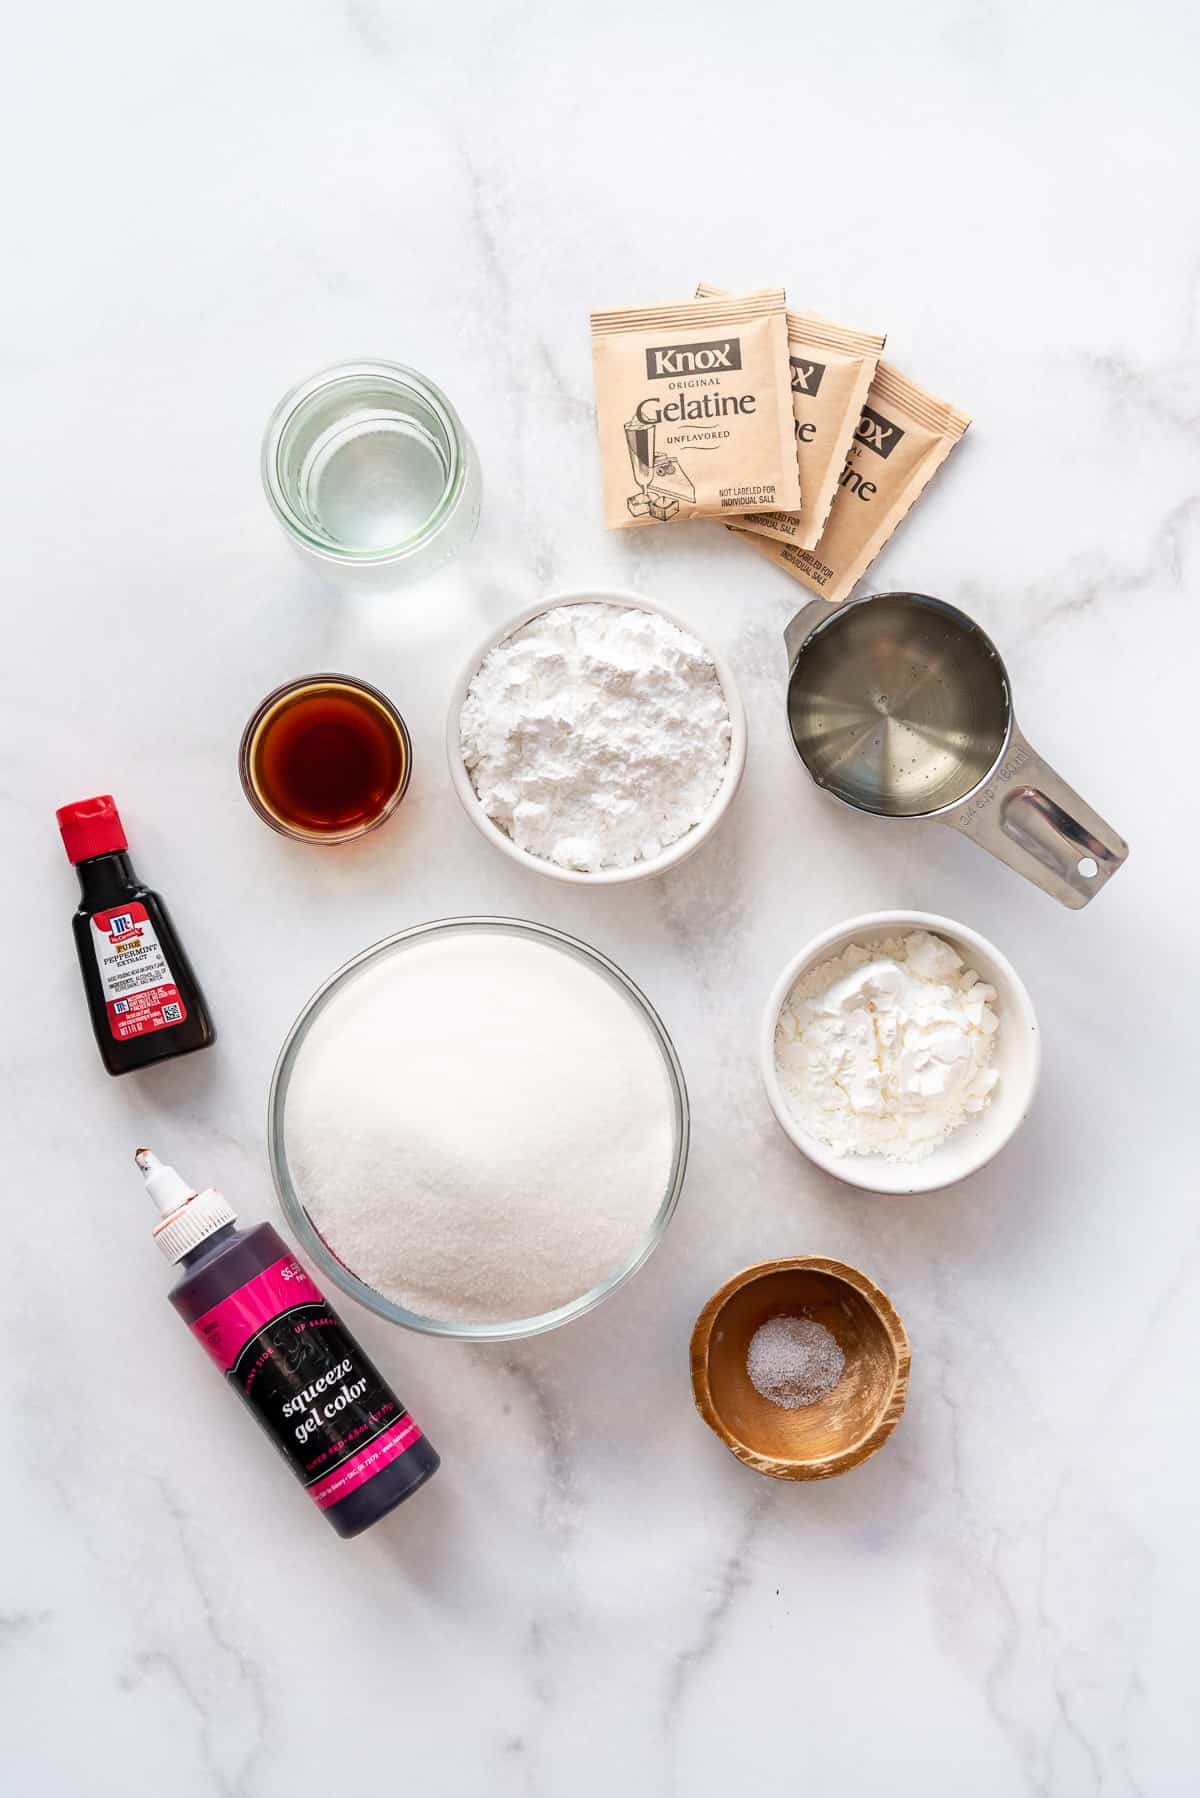 Ingredients for making peppermint marshmallows.